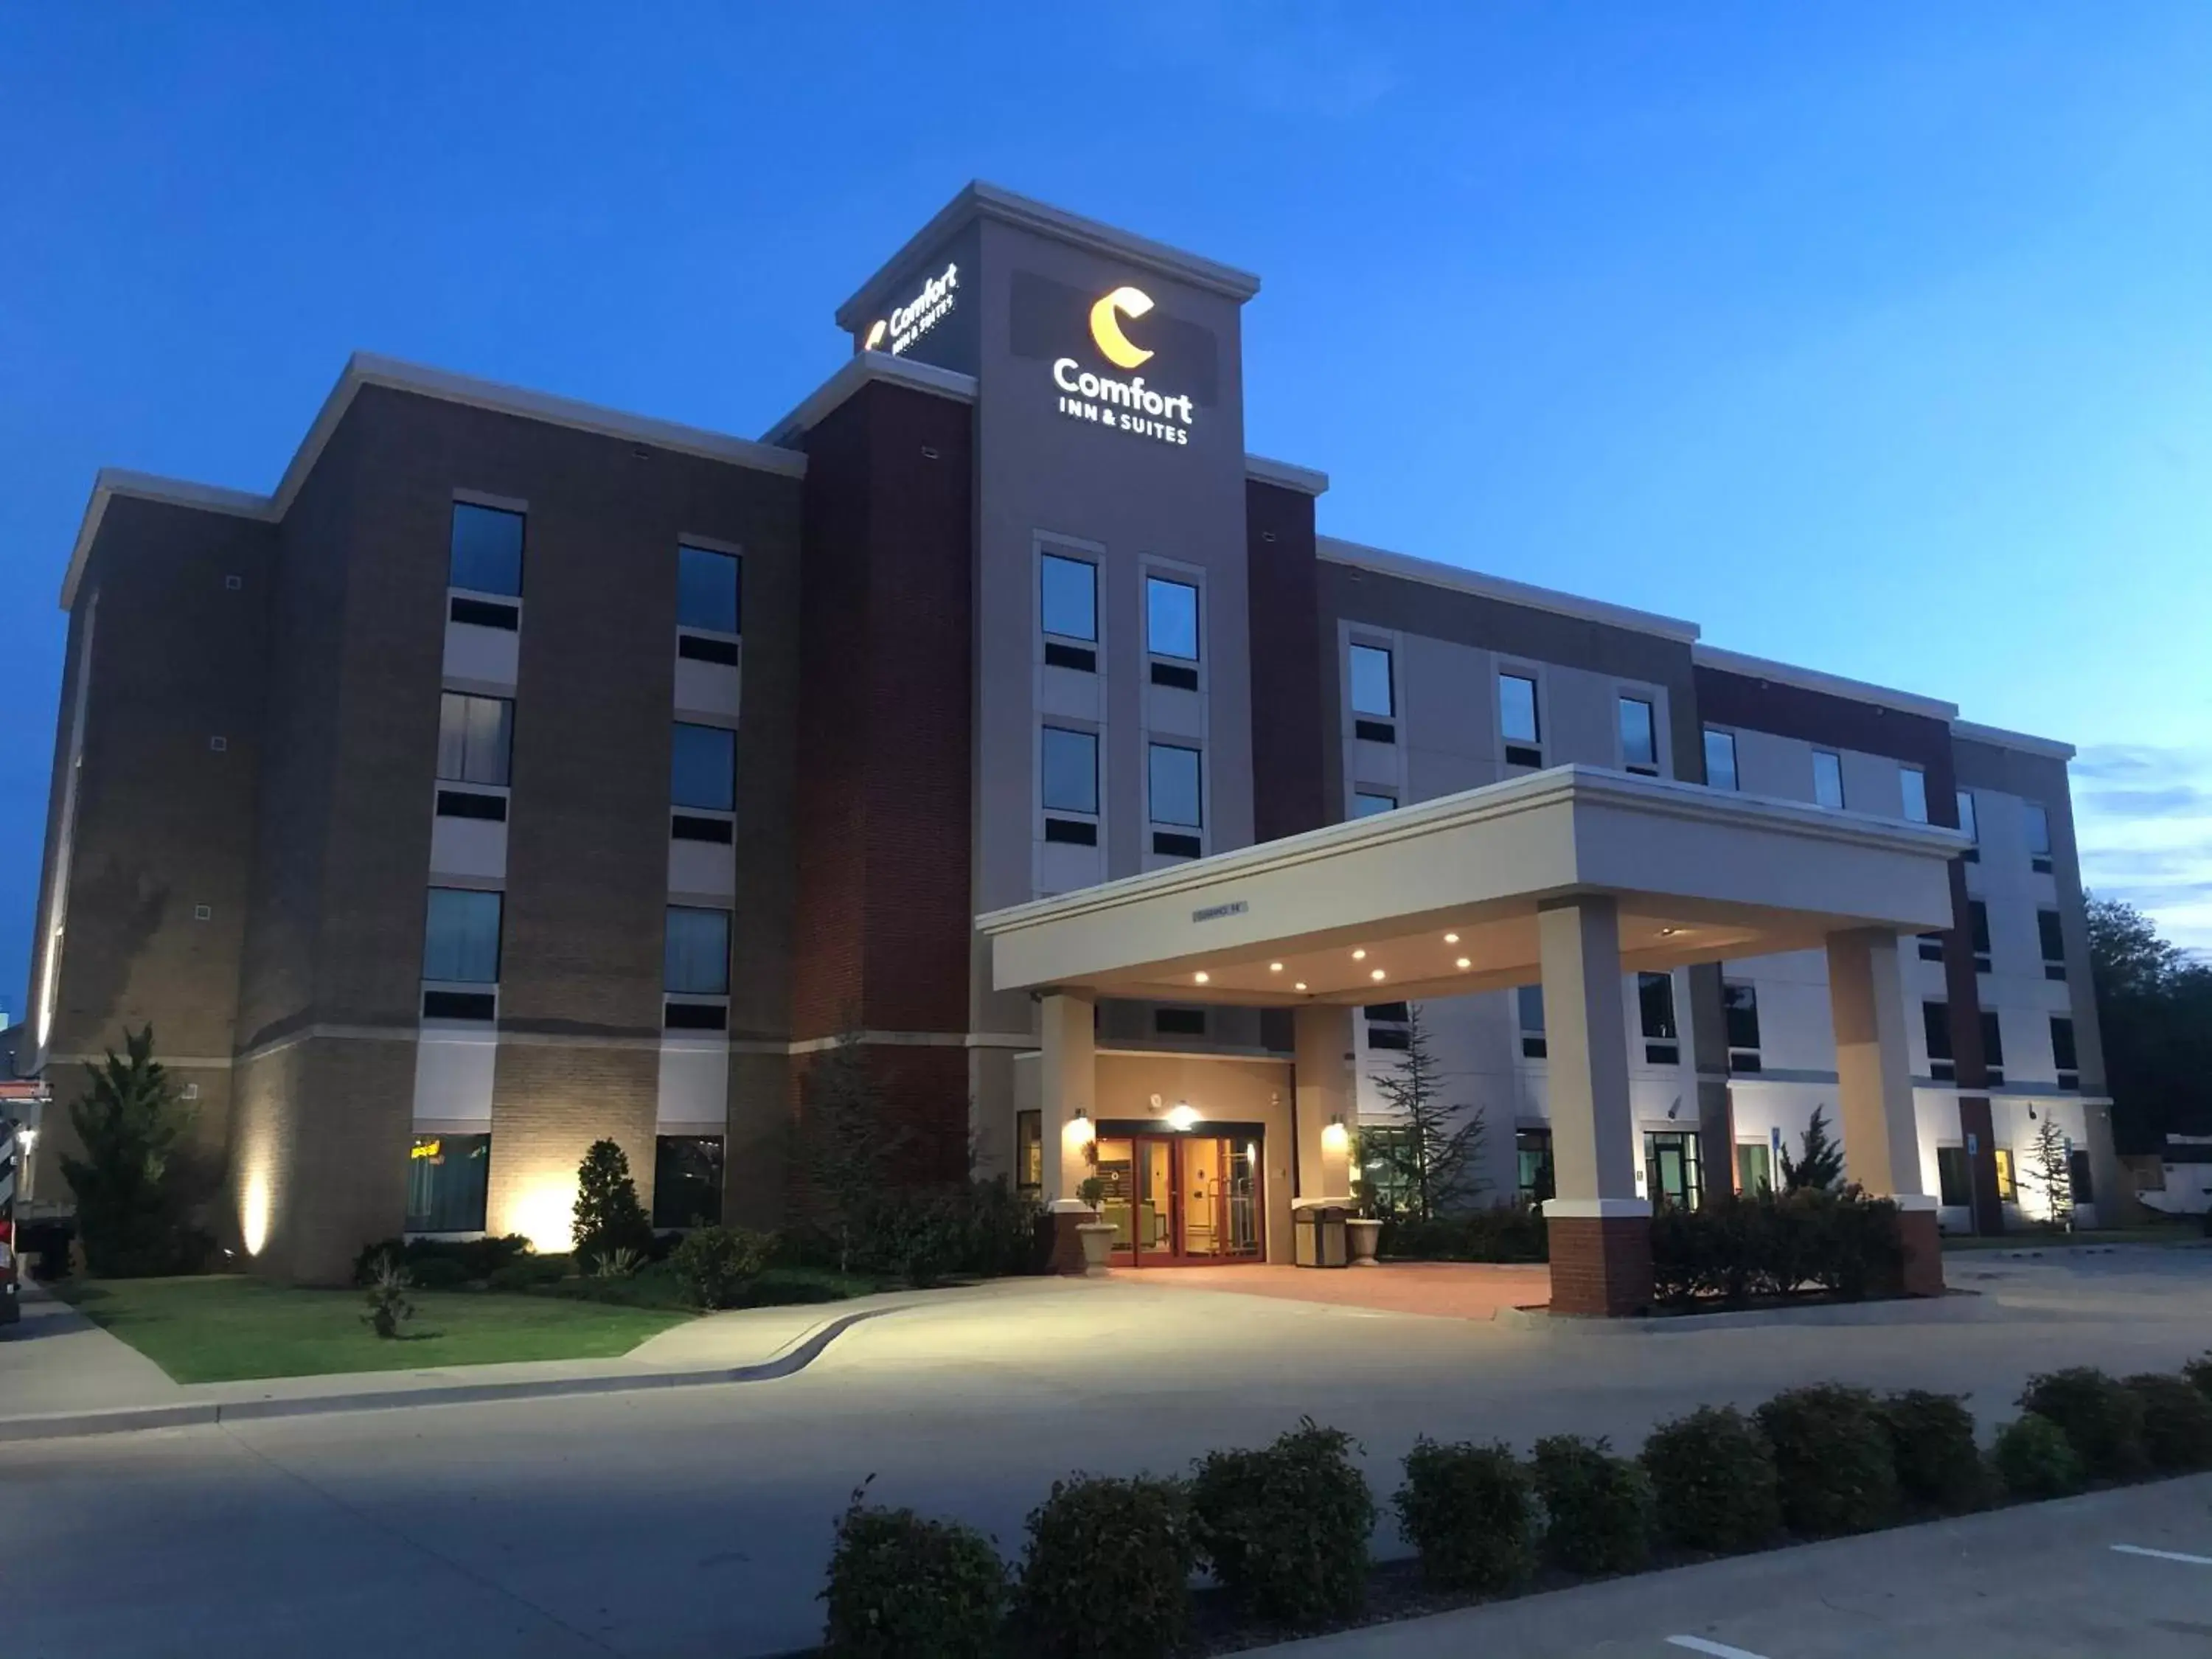 Property Building in Comfort Inn & Suites Newcastle - Oklahoma City